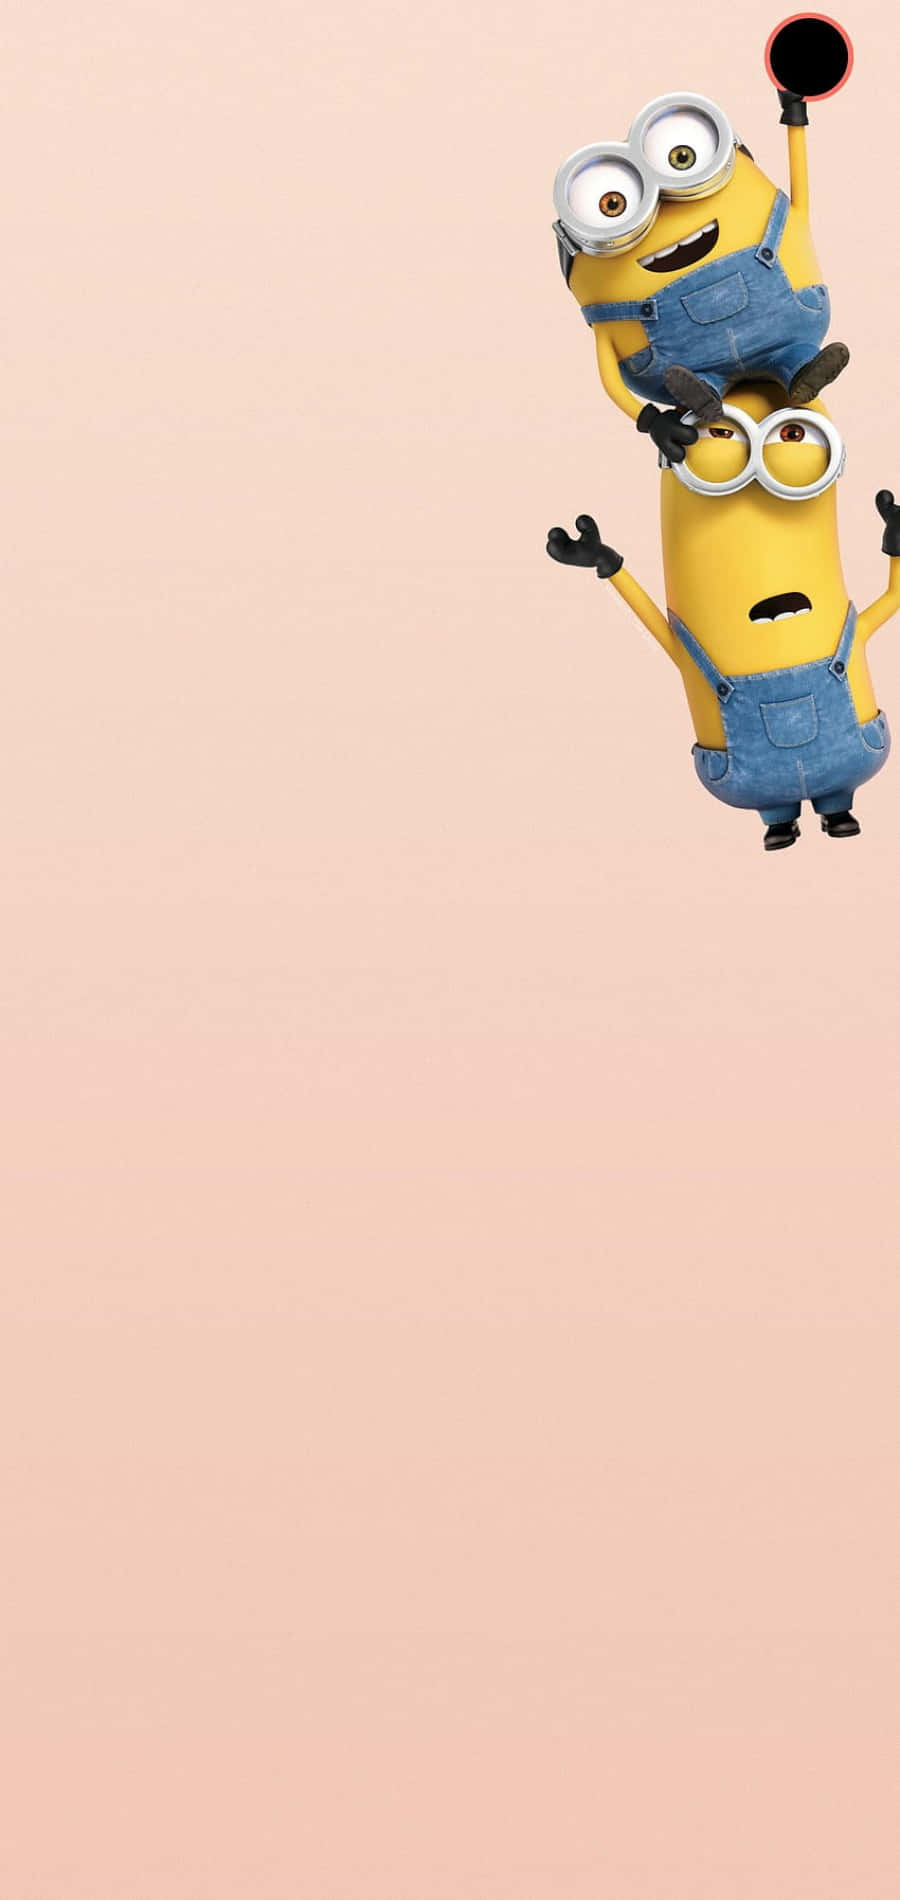 Pastel Pink Despicable Me Minion Iphone Wallpaper